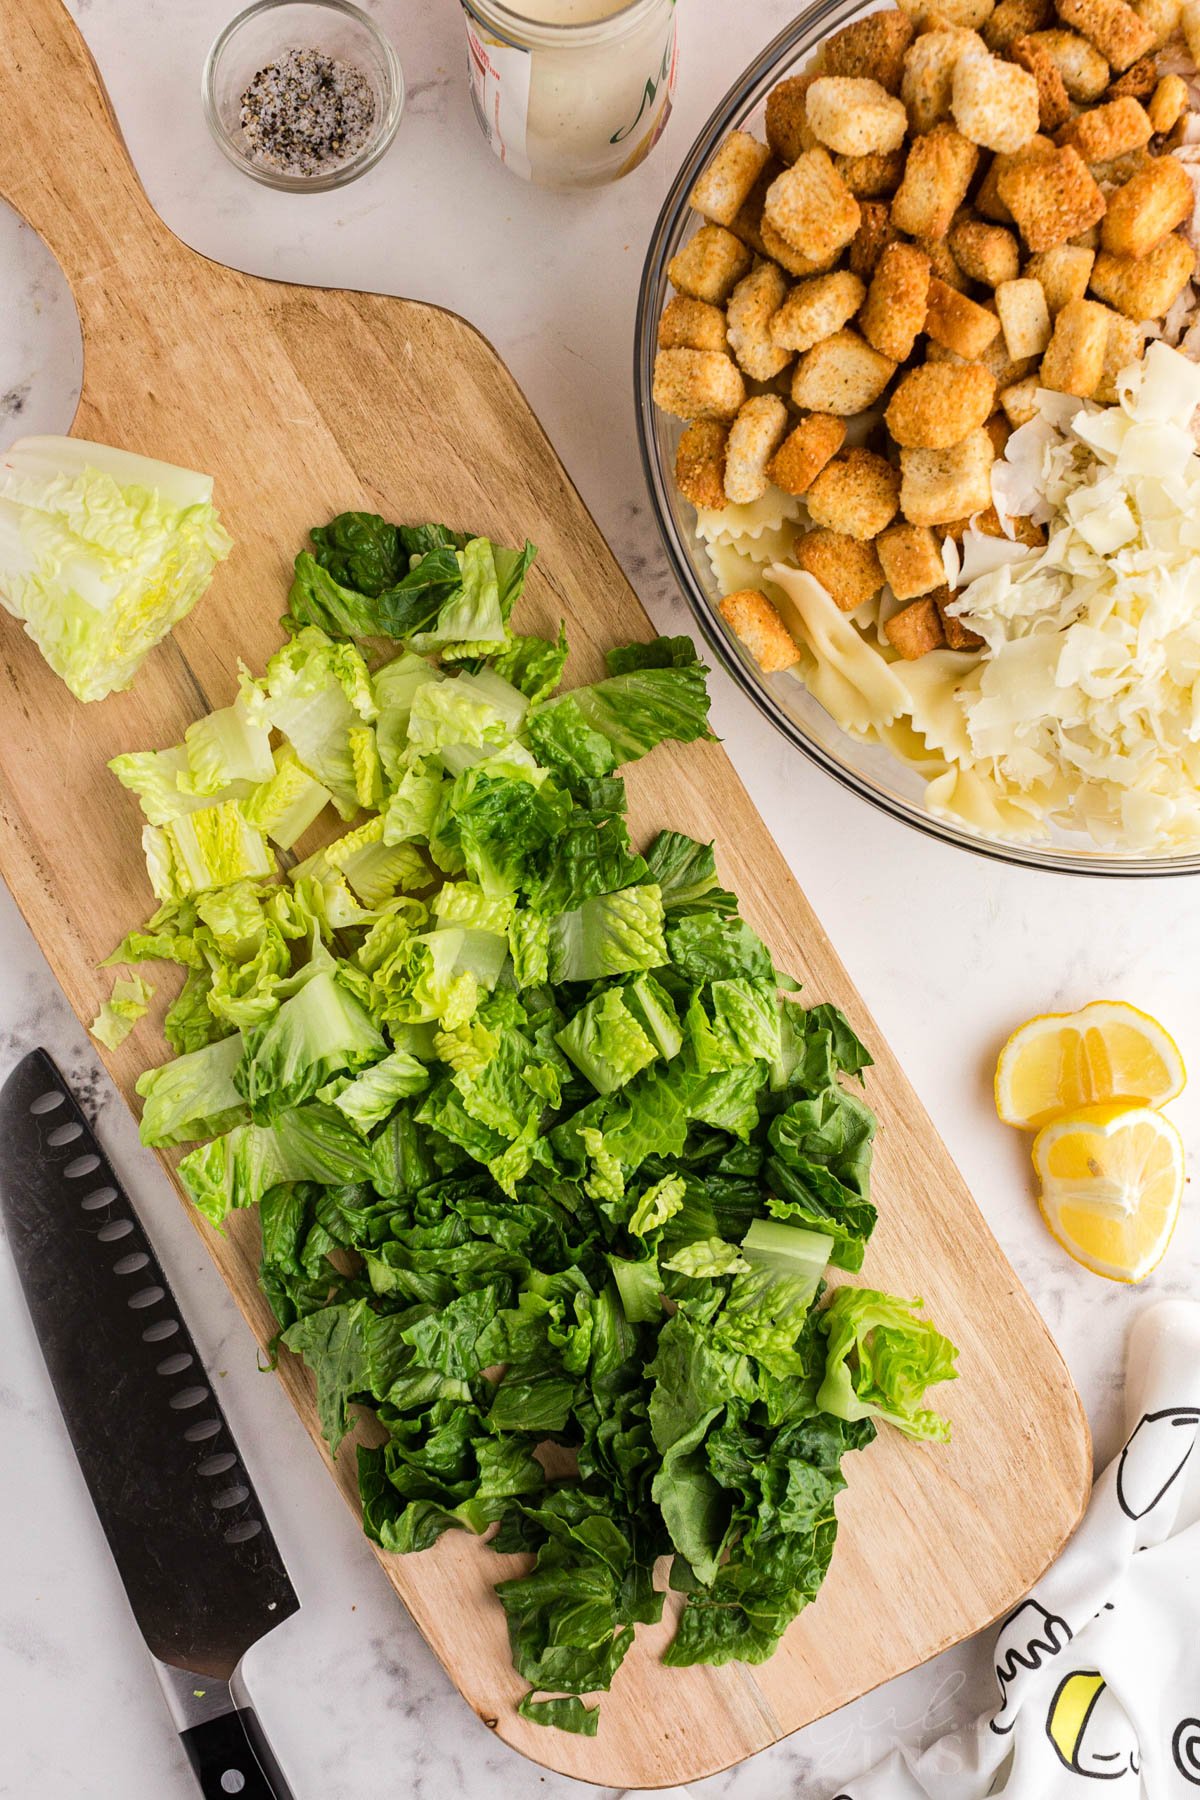 Chopped romaine lettuce on cutting board with a bowl of pasta, croutons, and cheese to the side.